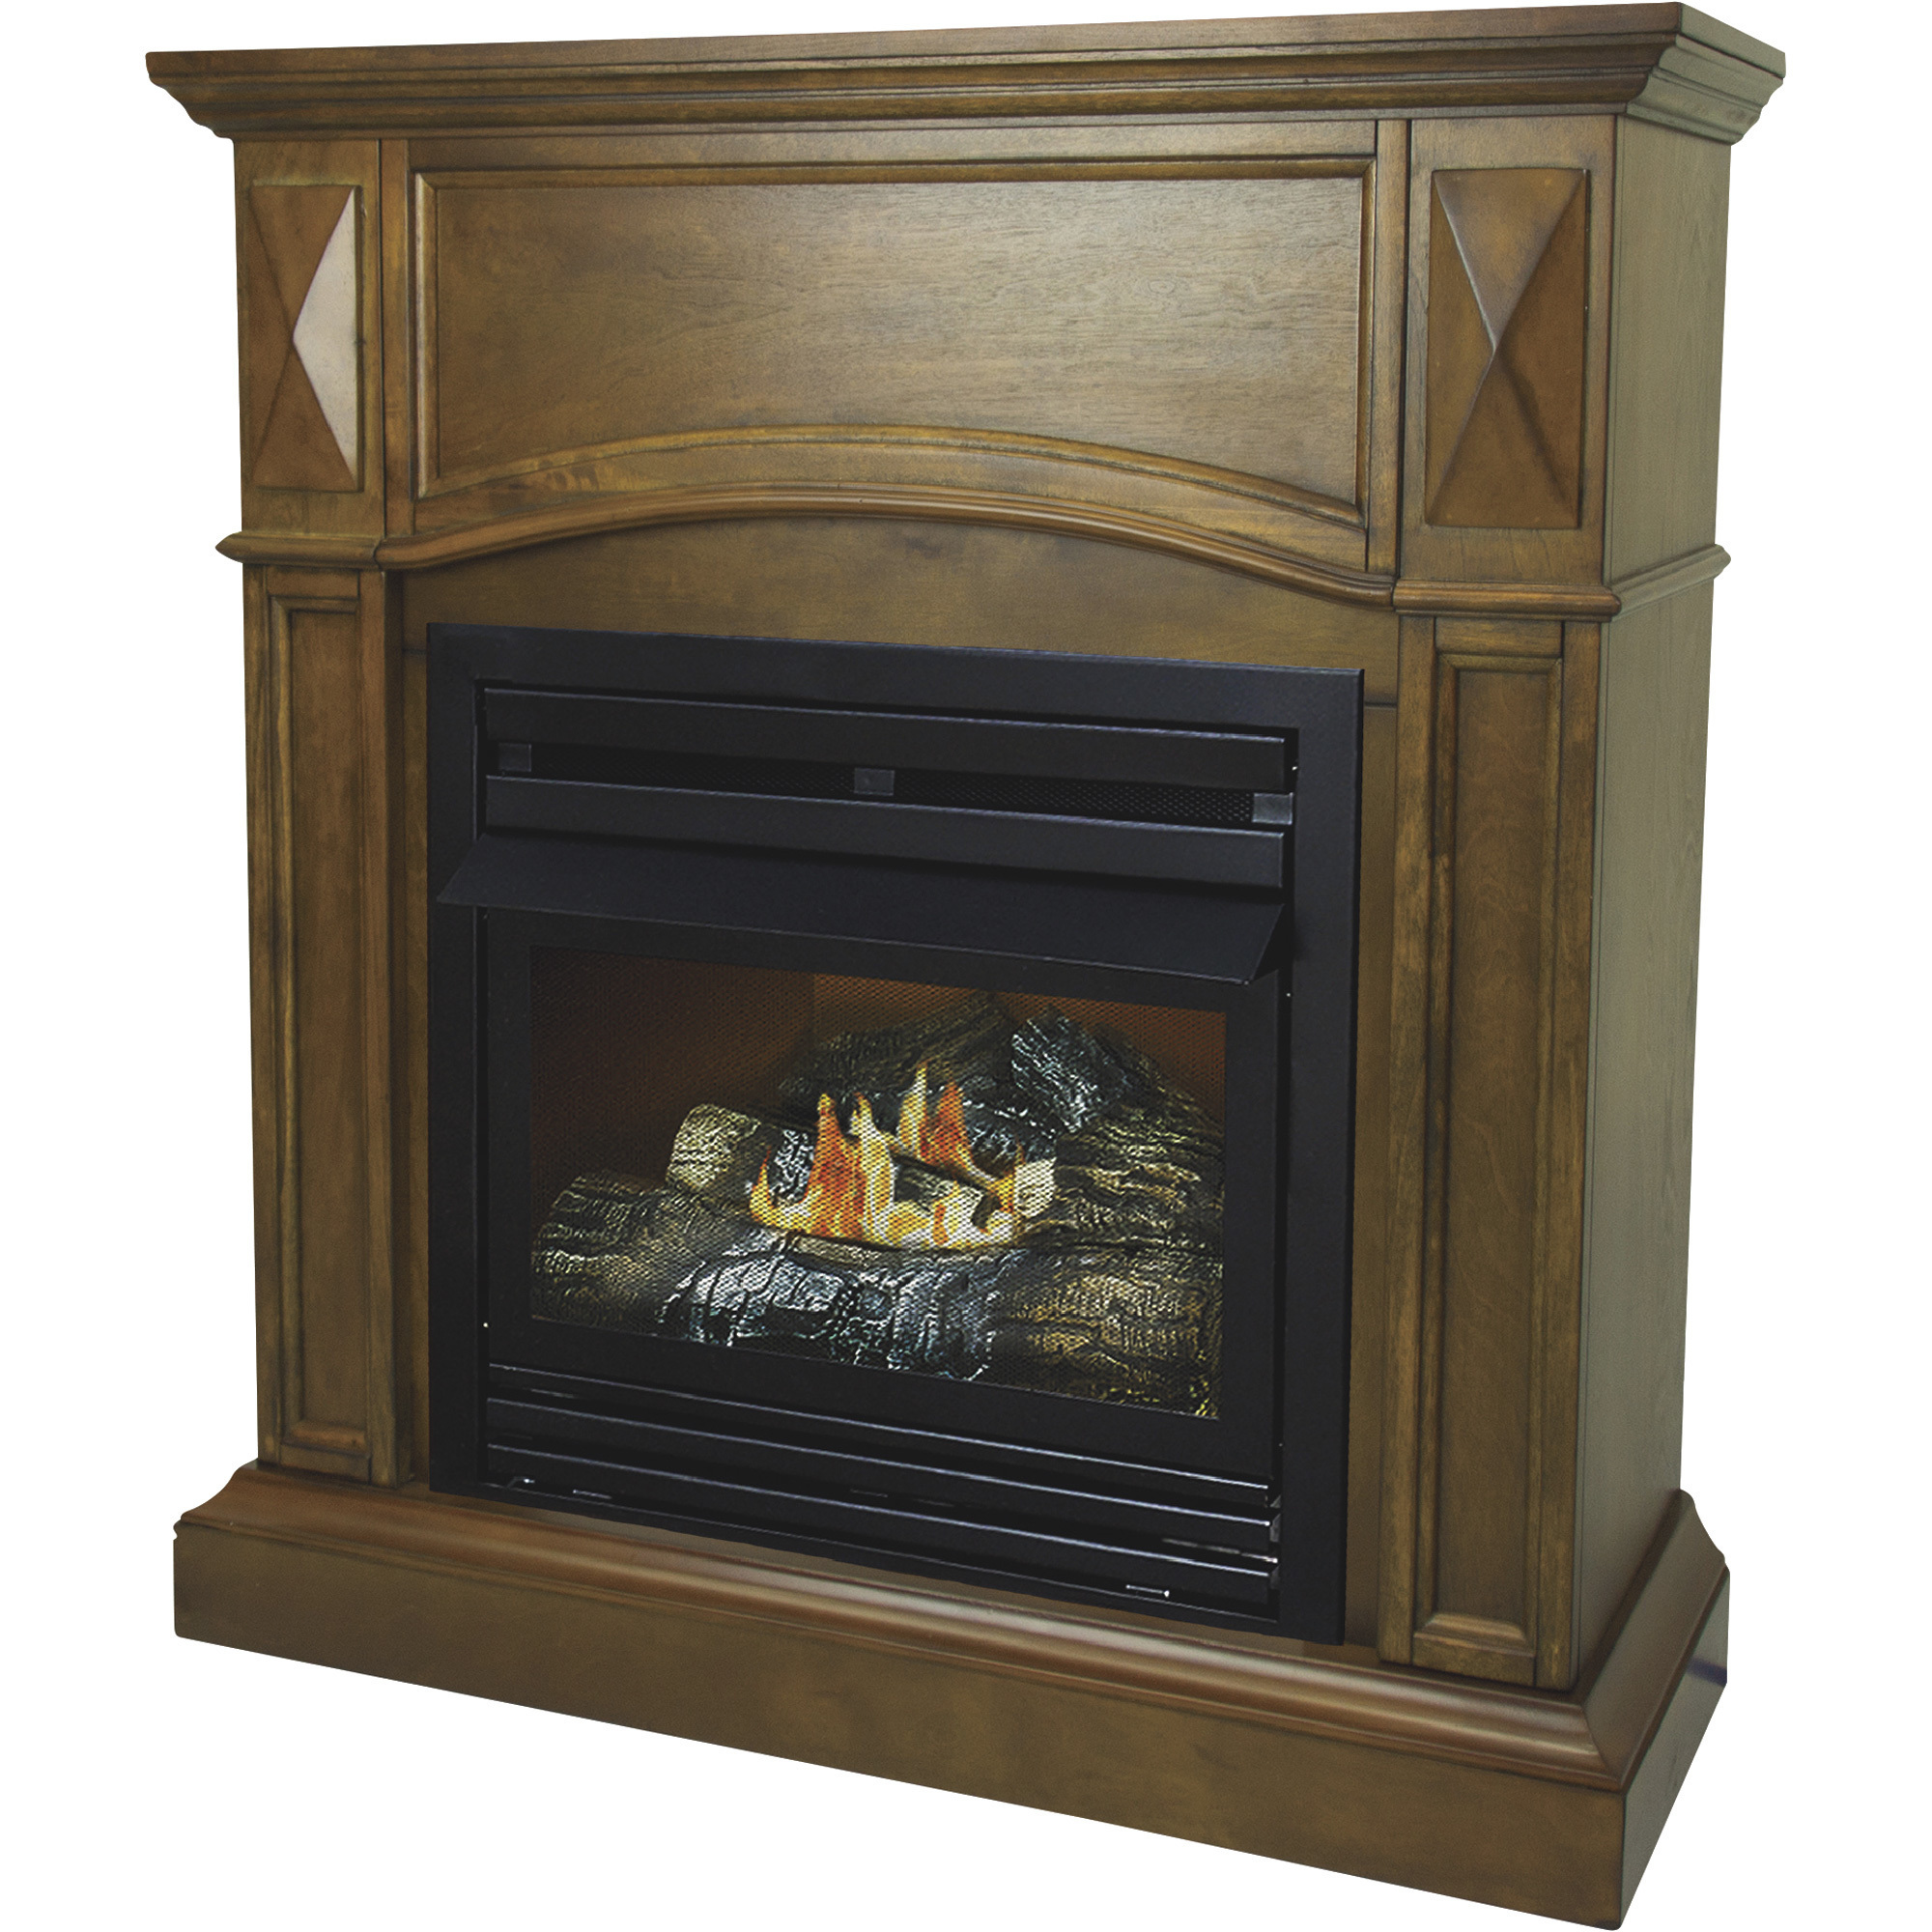 Compact Vent-Free Fireplace — 20,000 BTU, 36Inch, Natural Gas, Heritage Finish, Model - Pleasant Hearth VFF-PH20NG